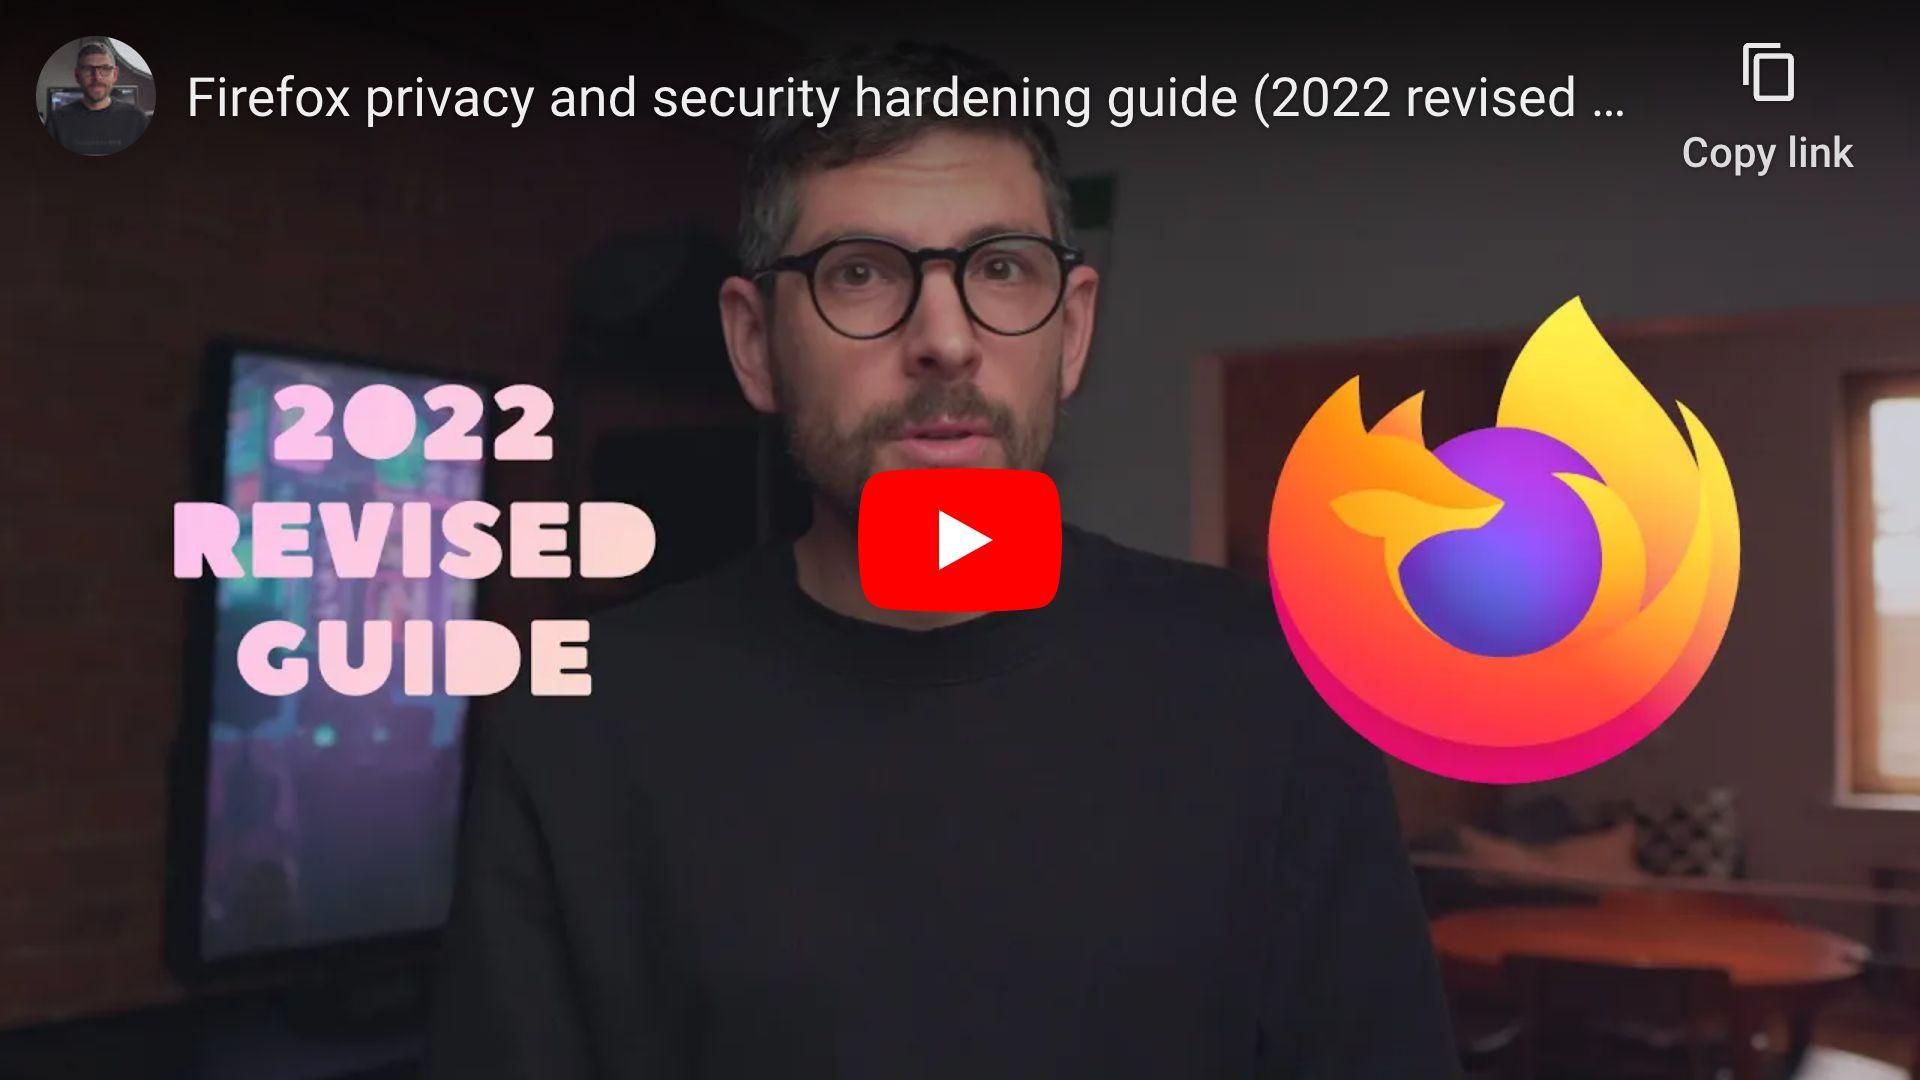 Firefox privacy and security hardening guide (2022 revised edition)